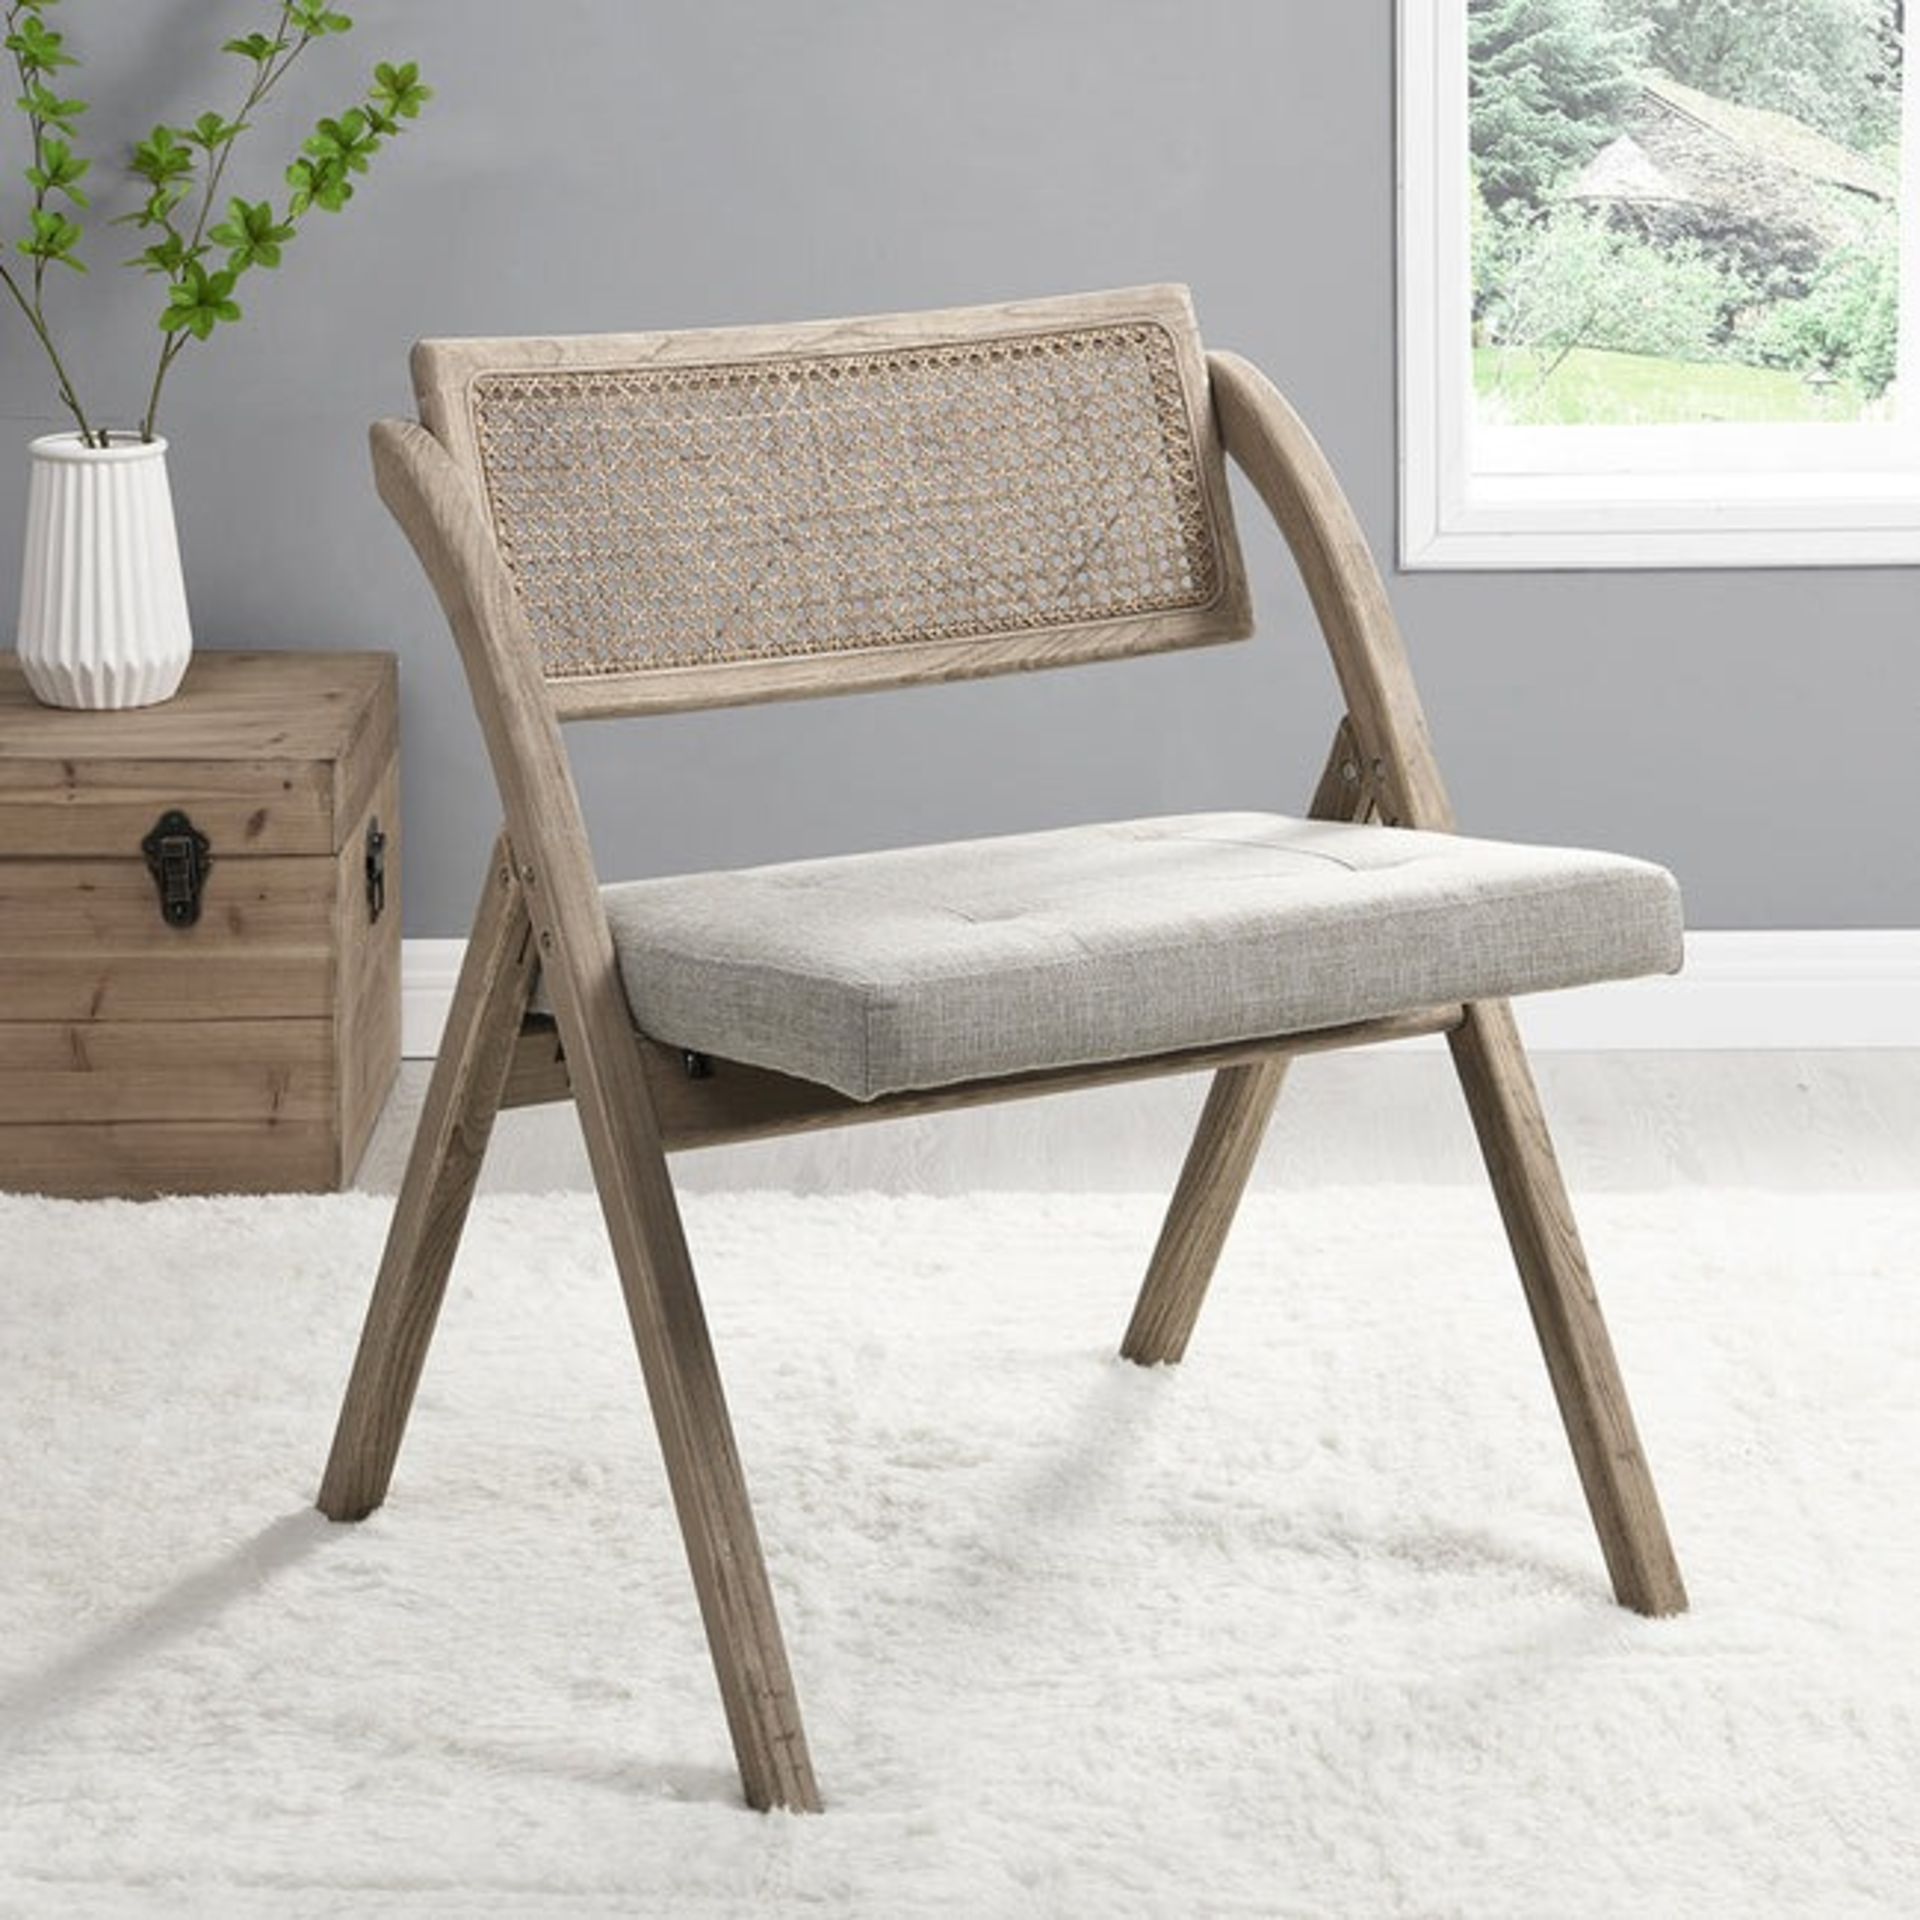 Bordon Natural Cane Rattan Folding Chair with Grey Upholstered Seat - ER29